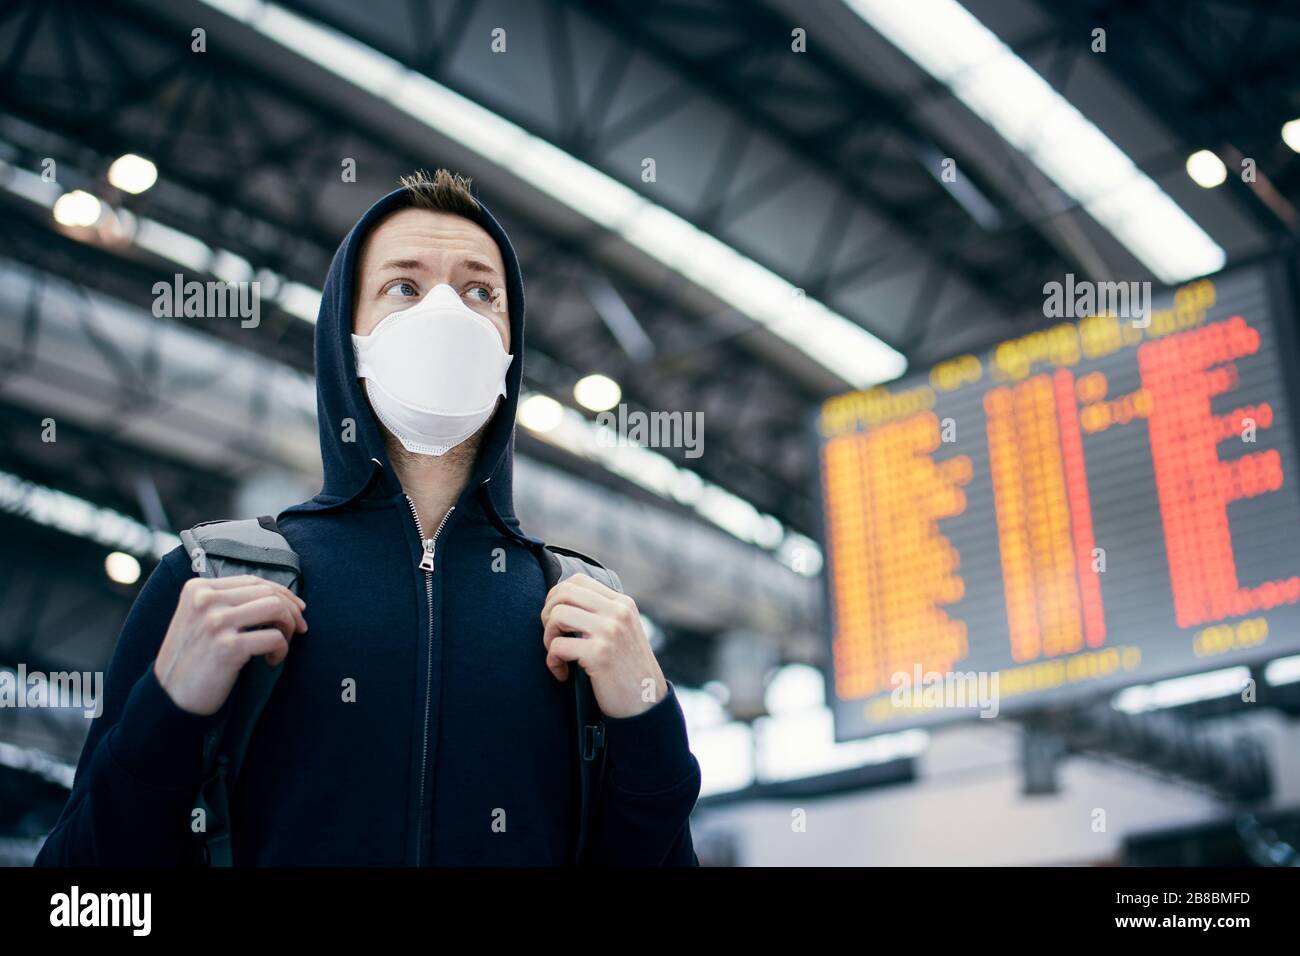 Man wearing face mask against airport departure board. Themes coronavirus, canceled flights and personal protection. Stock Photo